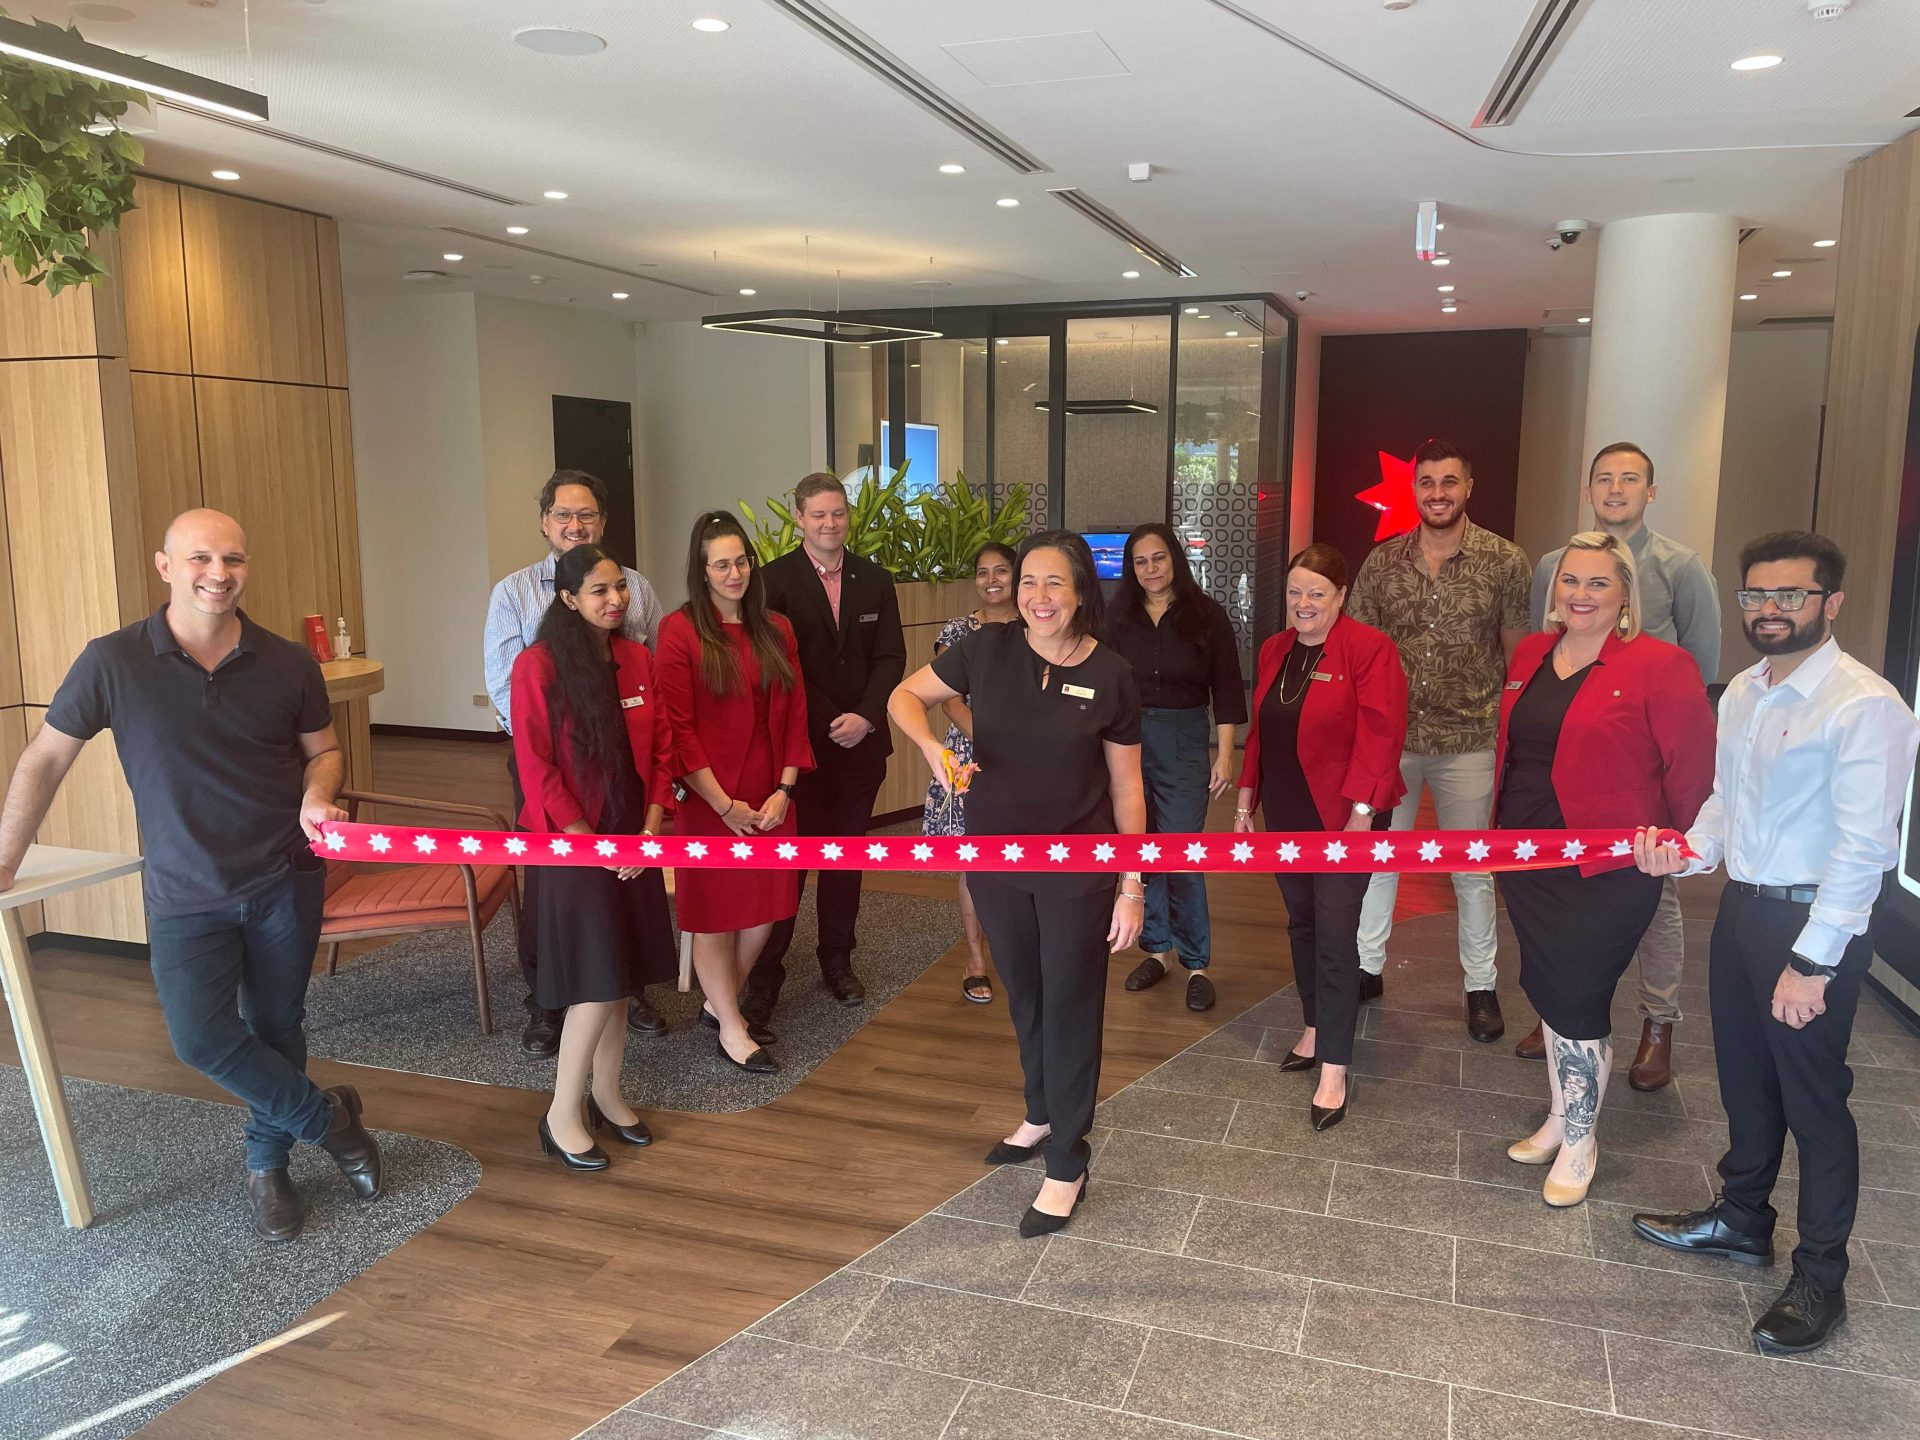 A team of 13 people standing behind a red ribbon as the branch manager cuts the ribbon with scissors